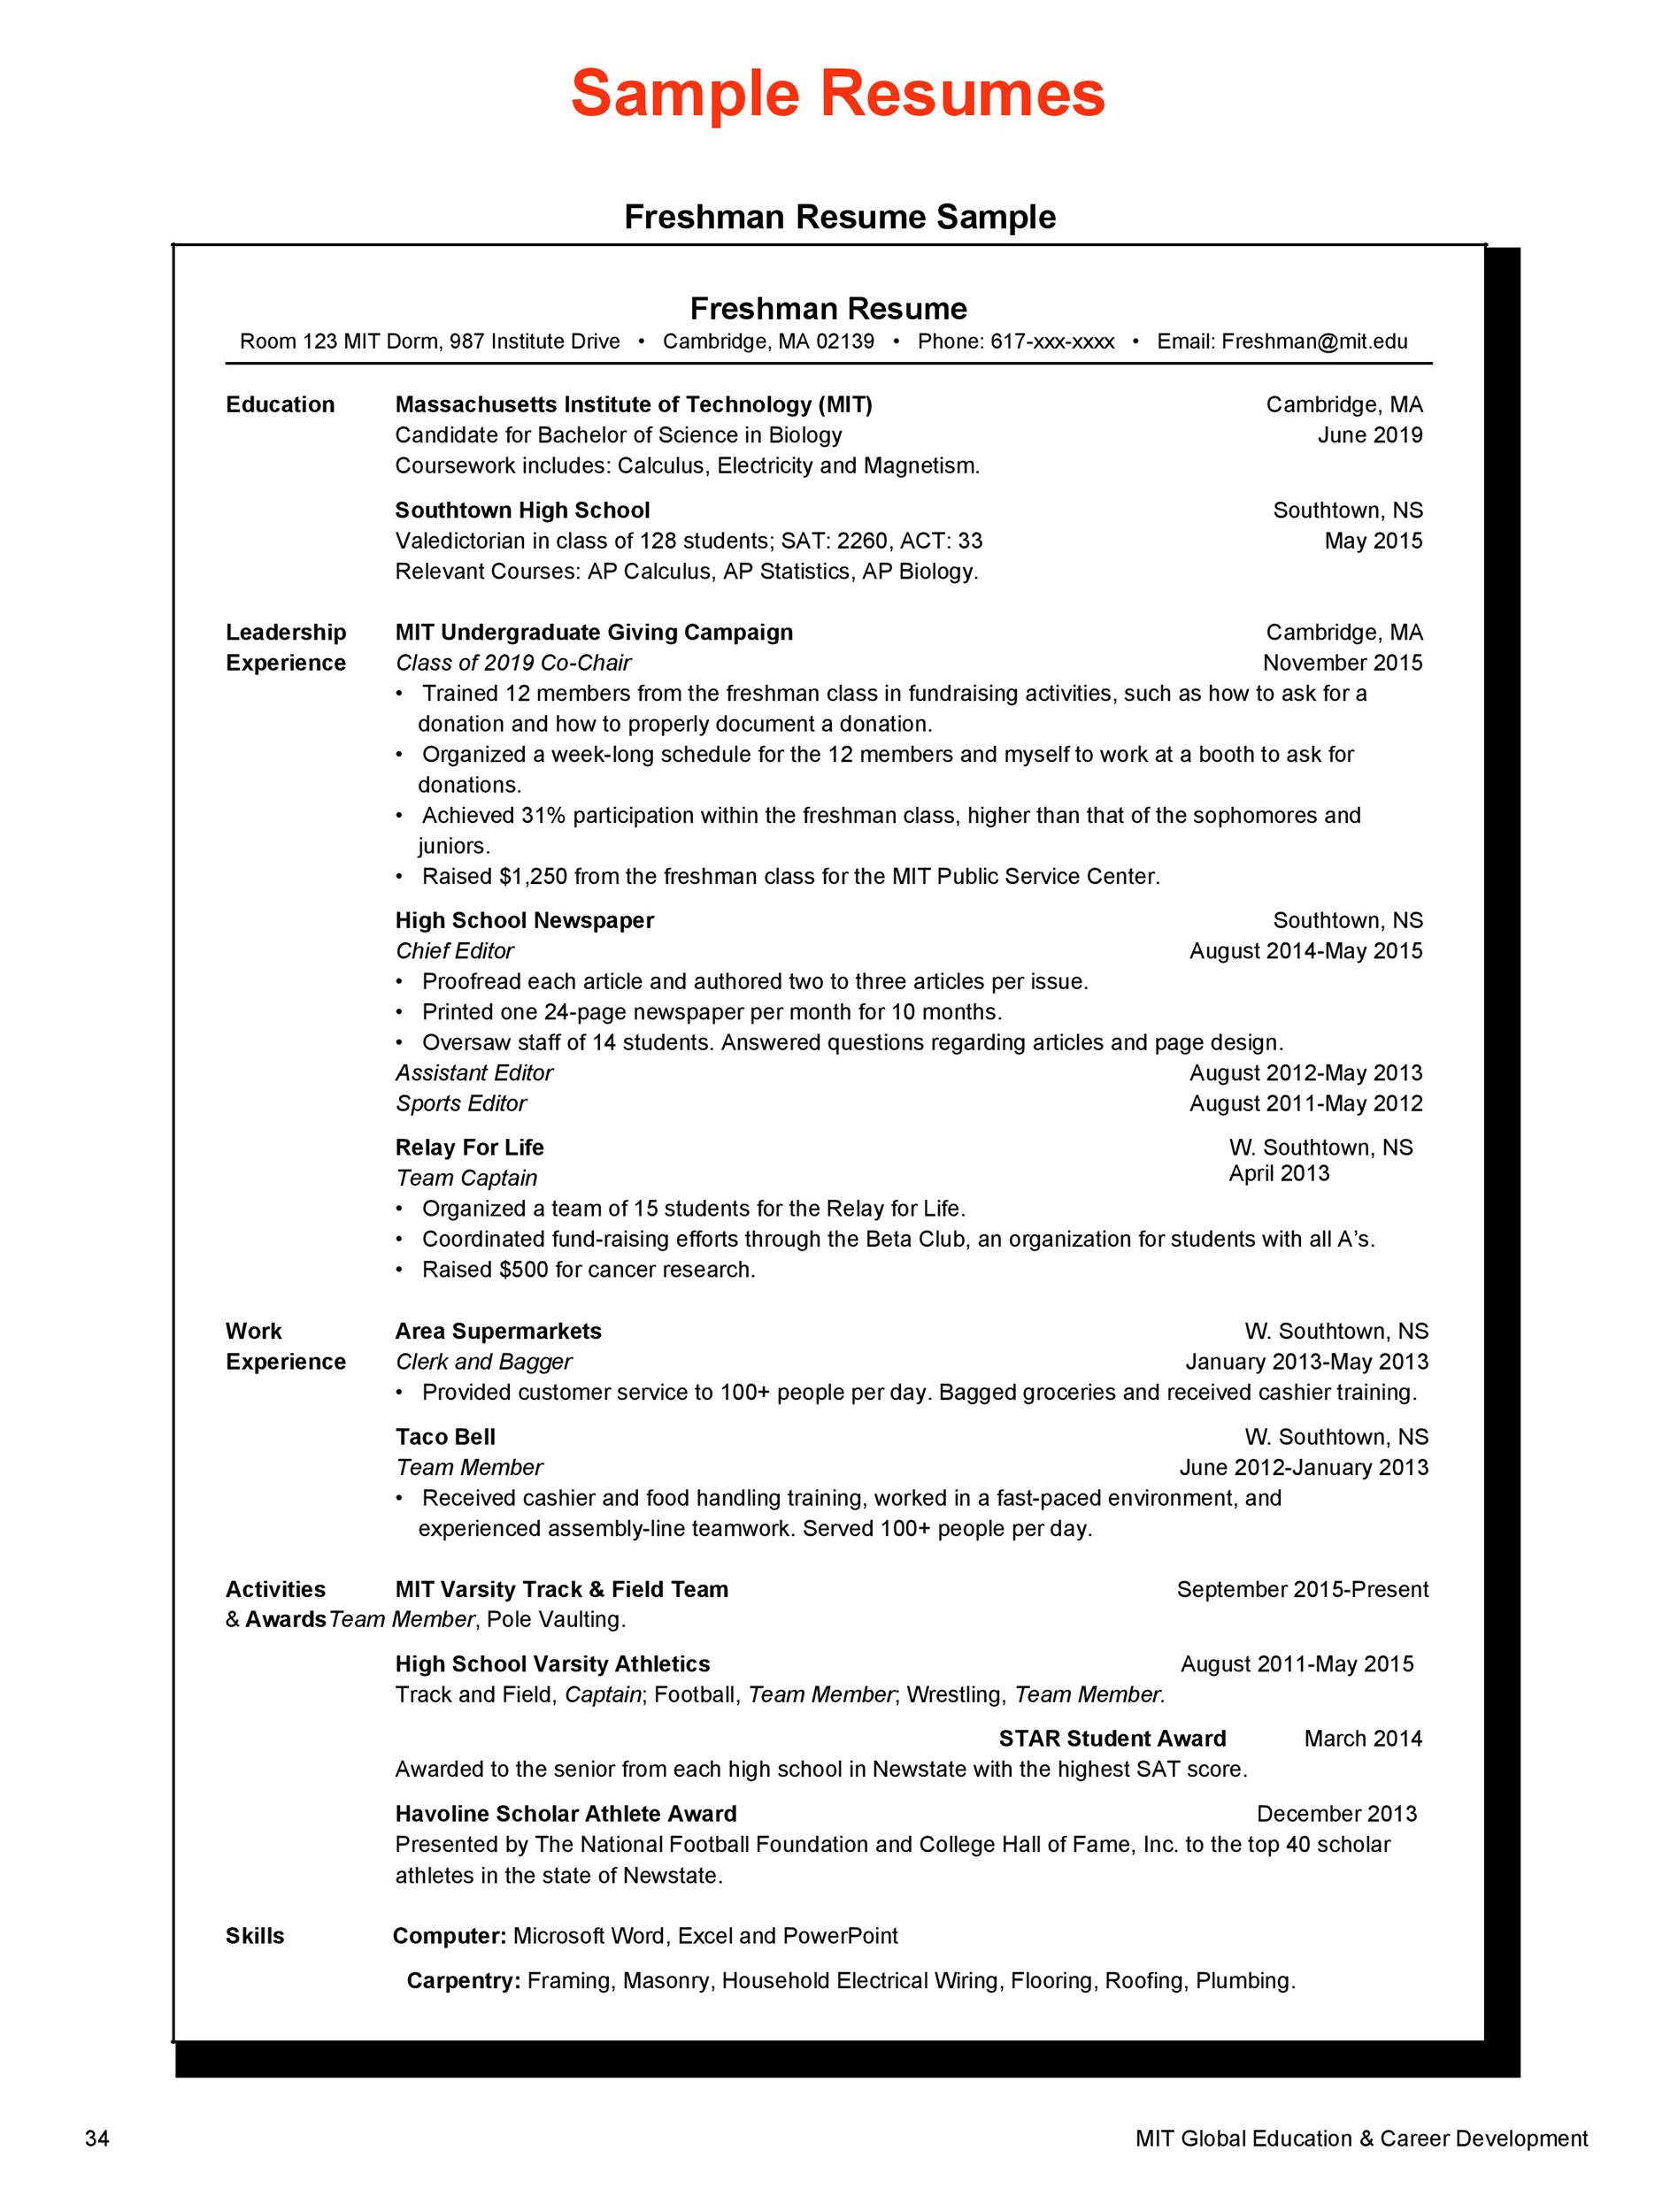 Free college resume template 18